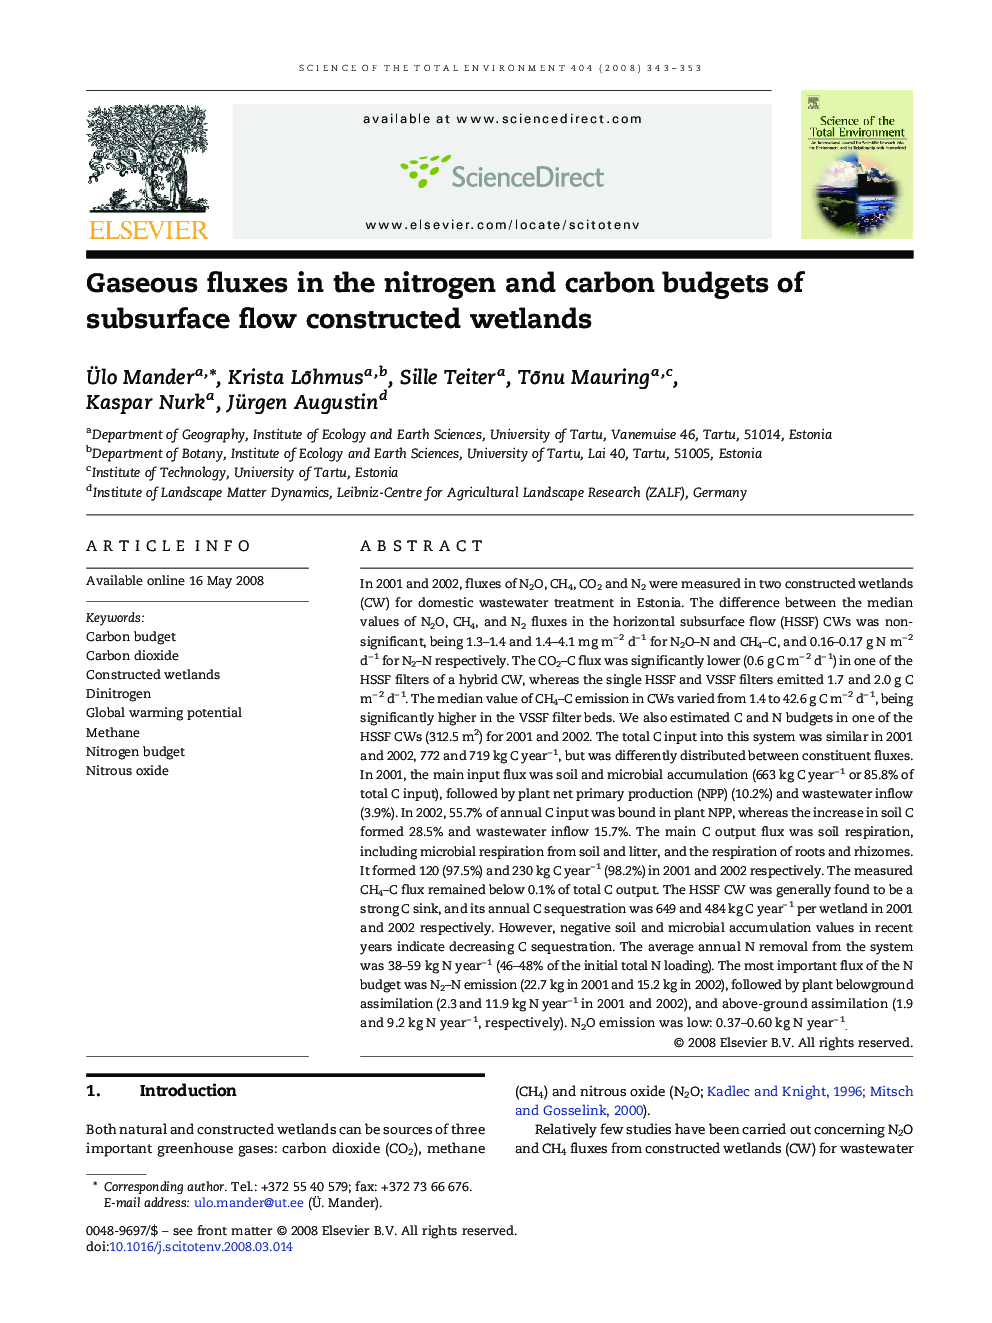 Gaseous fluxes in the nitrogen and carbon budgets of subsurface flow constructed wetlands